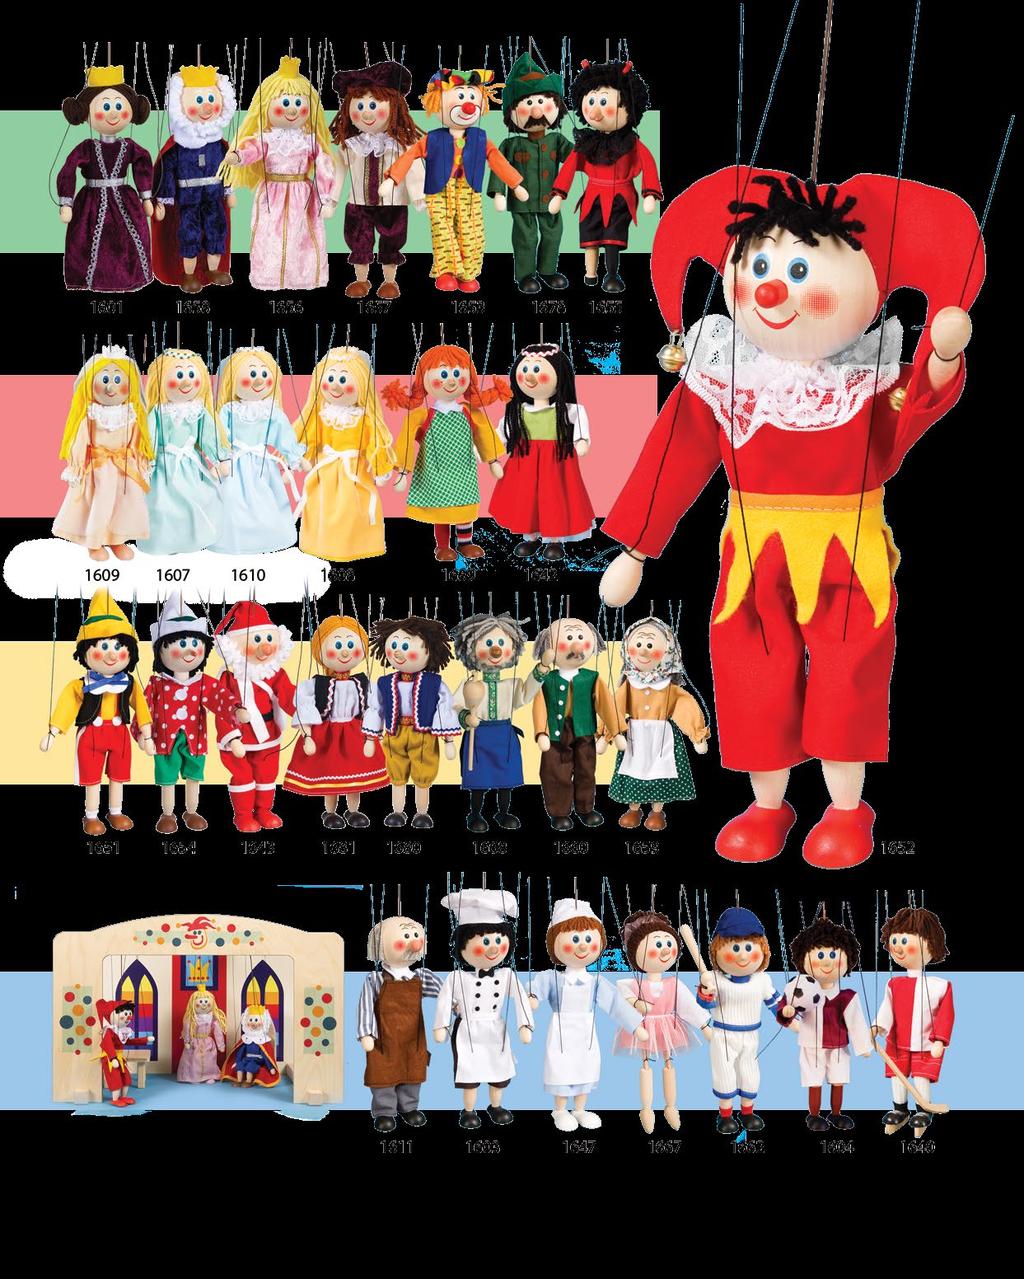 WOODEN PUPPETS 20 cm Puppet theatre for 20 cm sizepuppets - 62 The most popular series